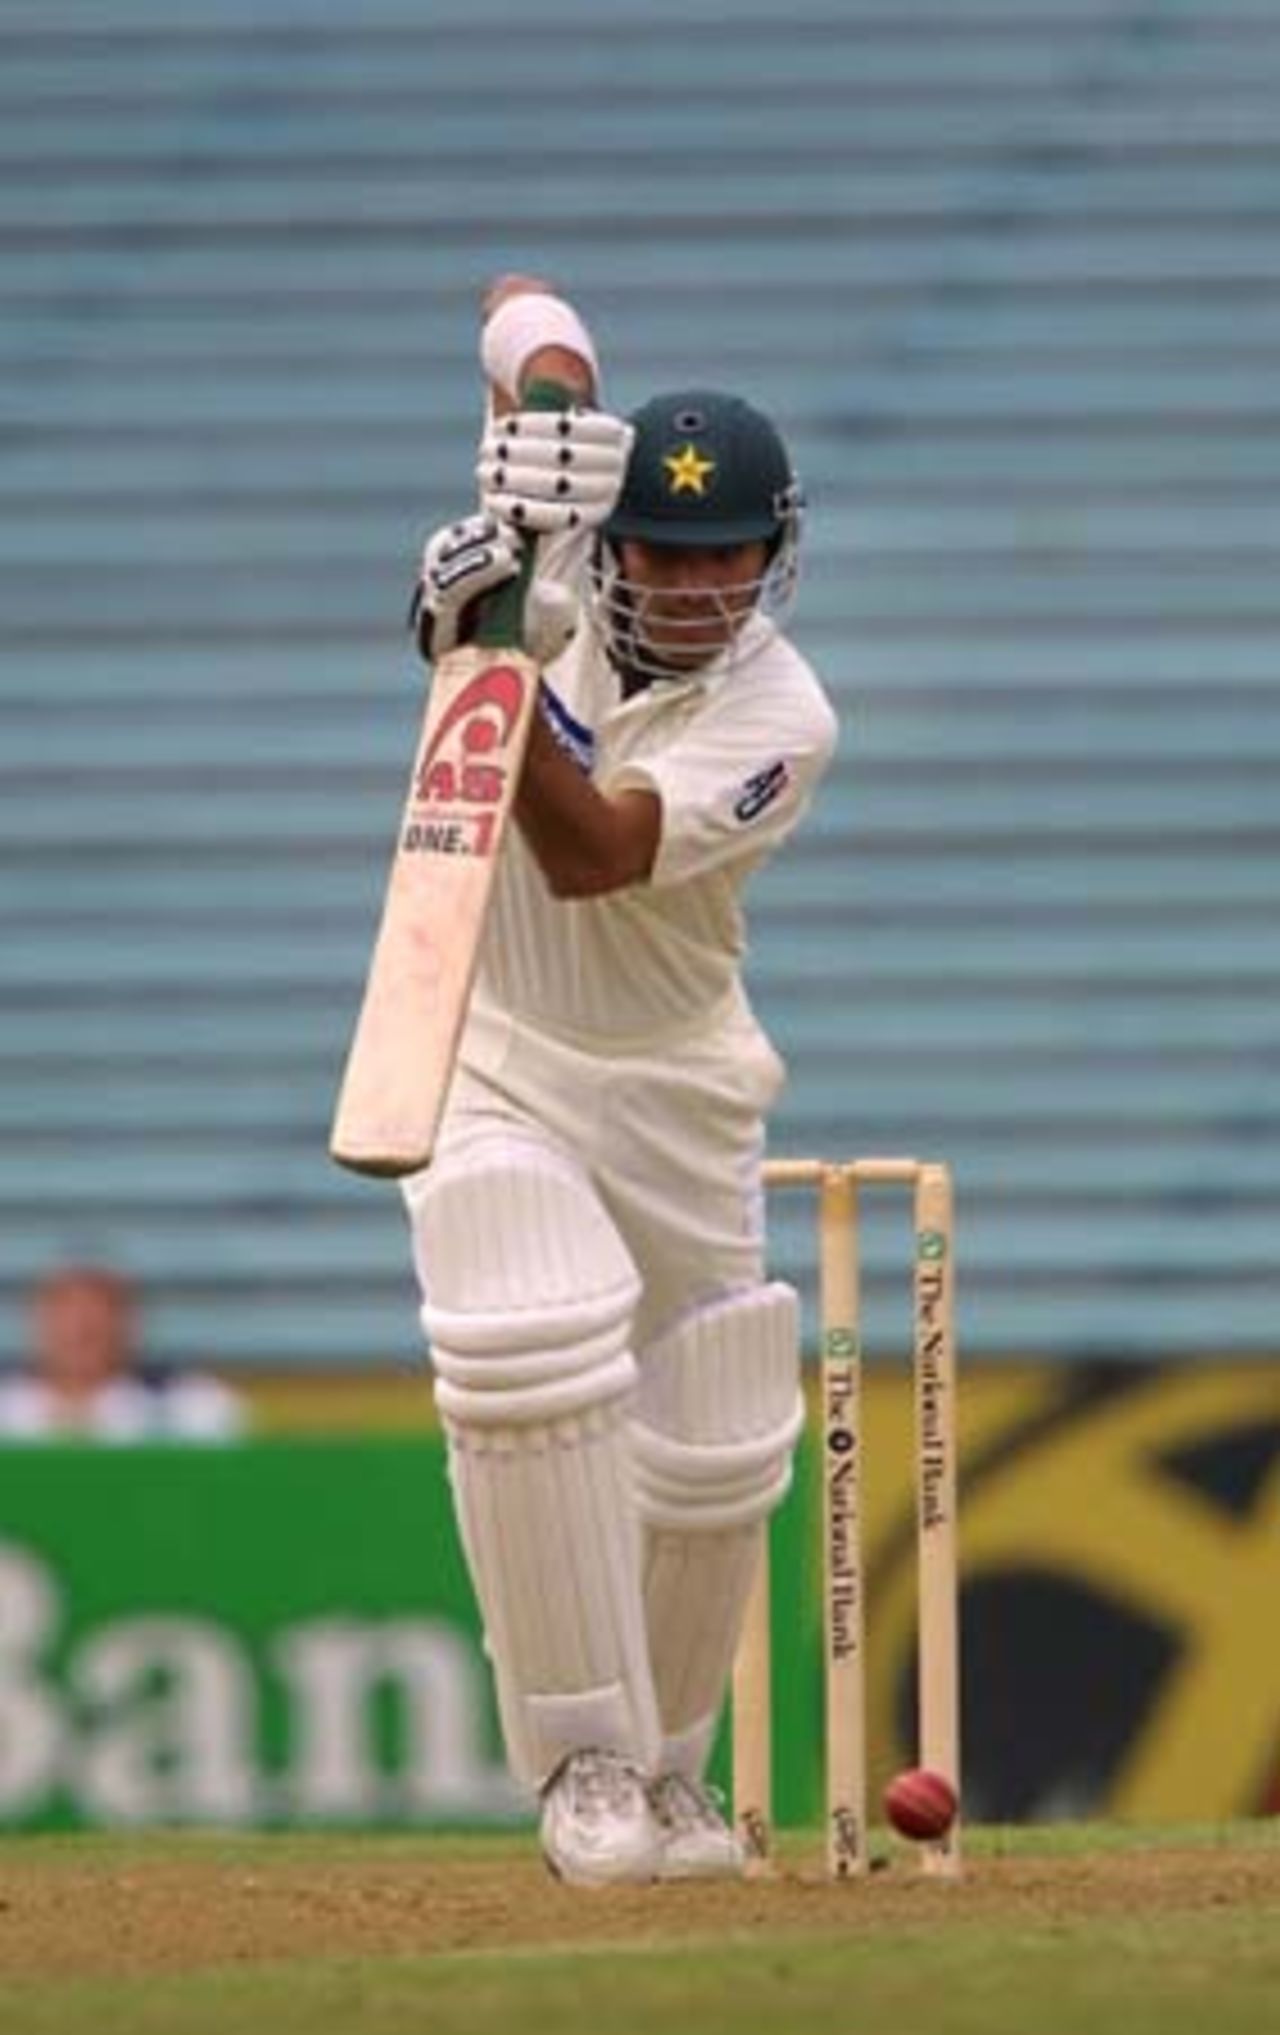 Debutant Pakistan opening batsman Imran Farhat drives on the off side during his innings of 23. 1st Test: New Zealand v Pakistan at Eden Park, Auckland, 8-12 March 2001 (8 March 2001).